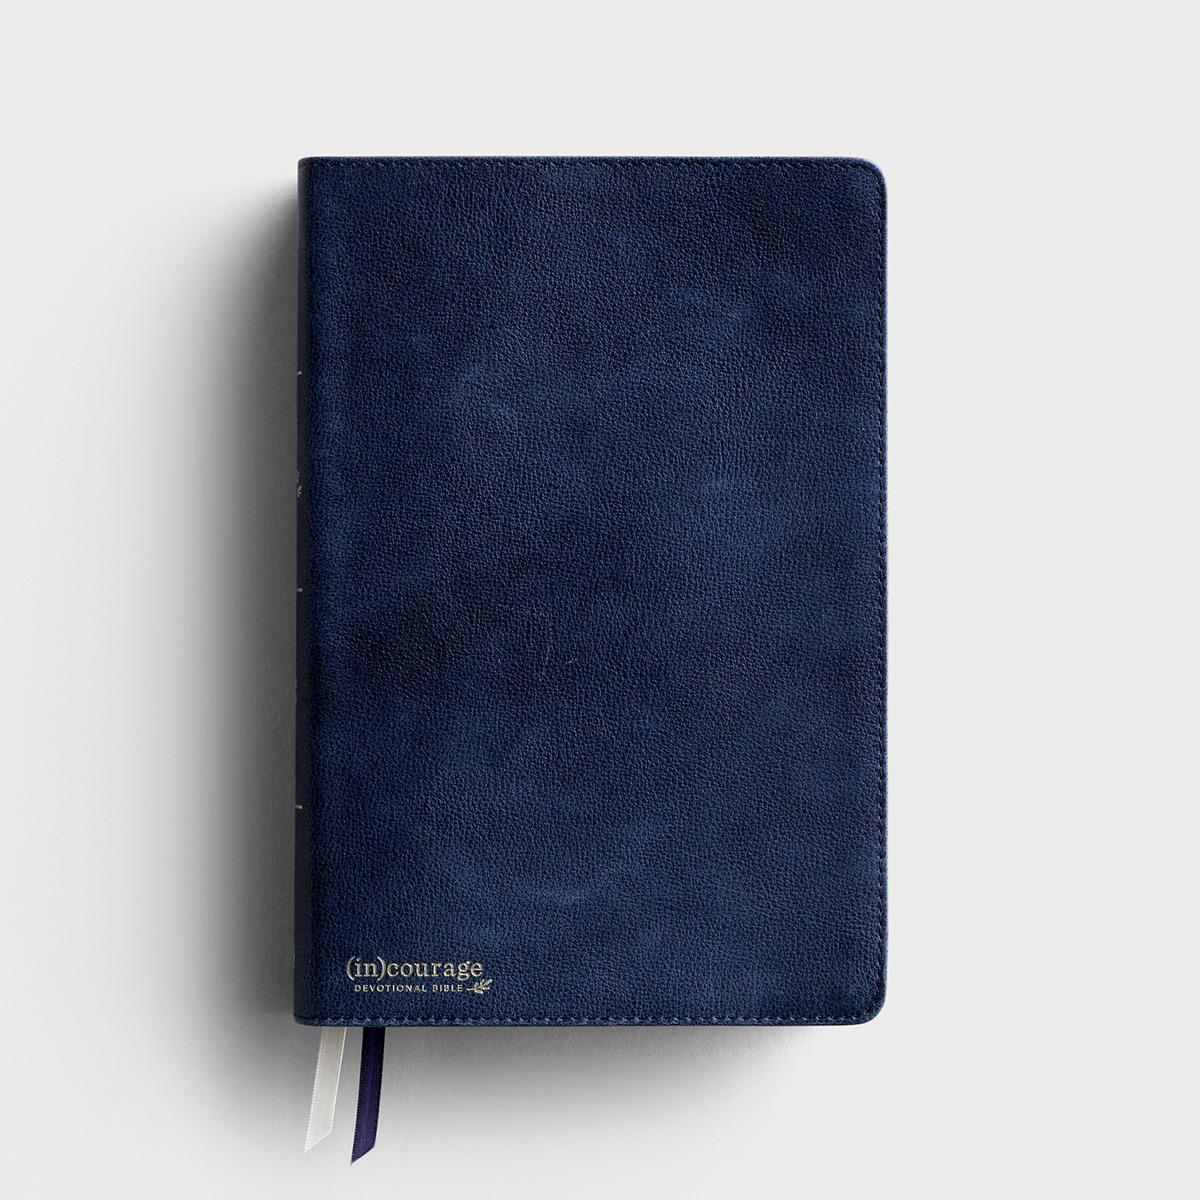 CSB (in)courage Devotional Bible - Navy Genuine Leather